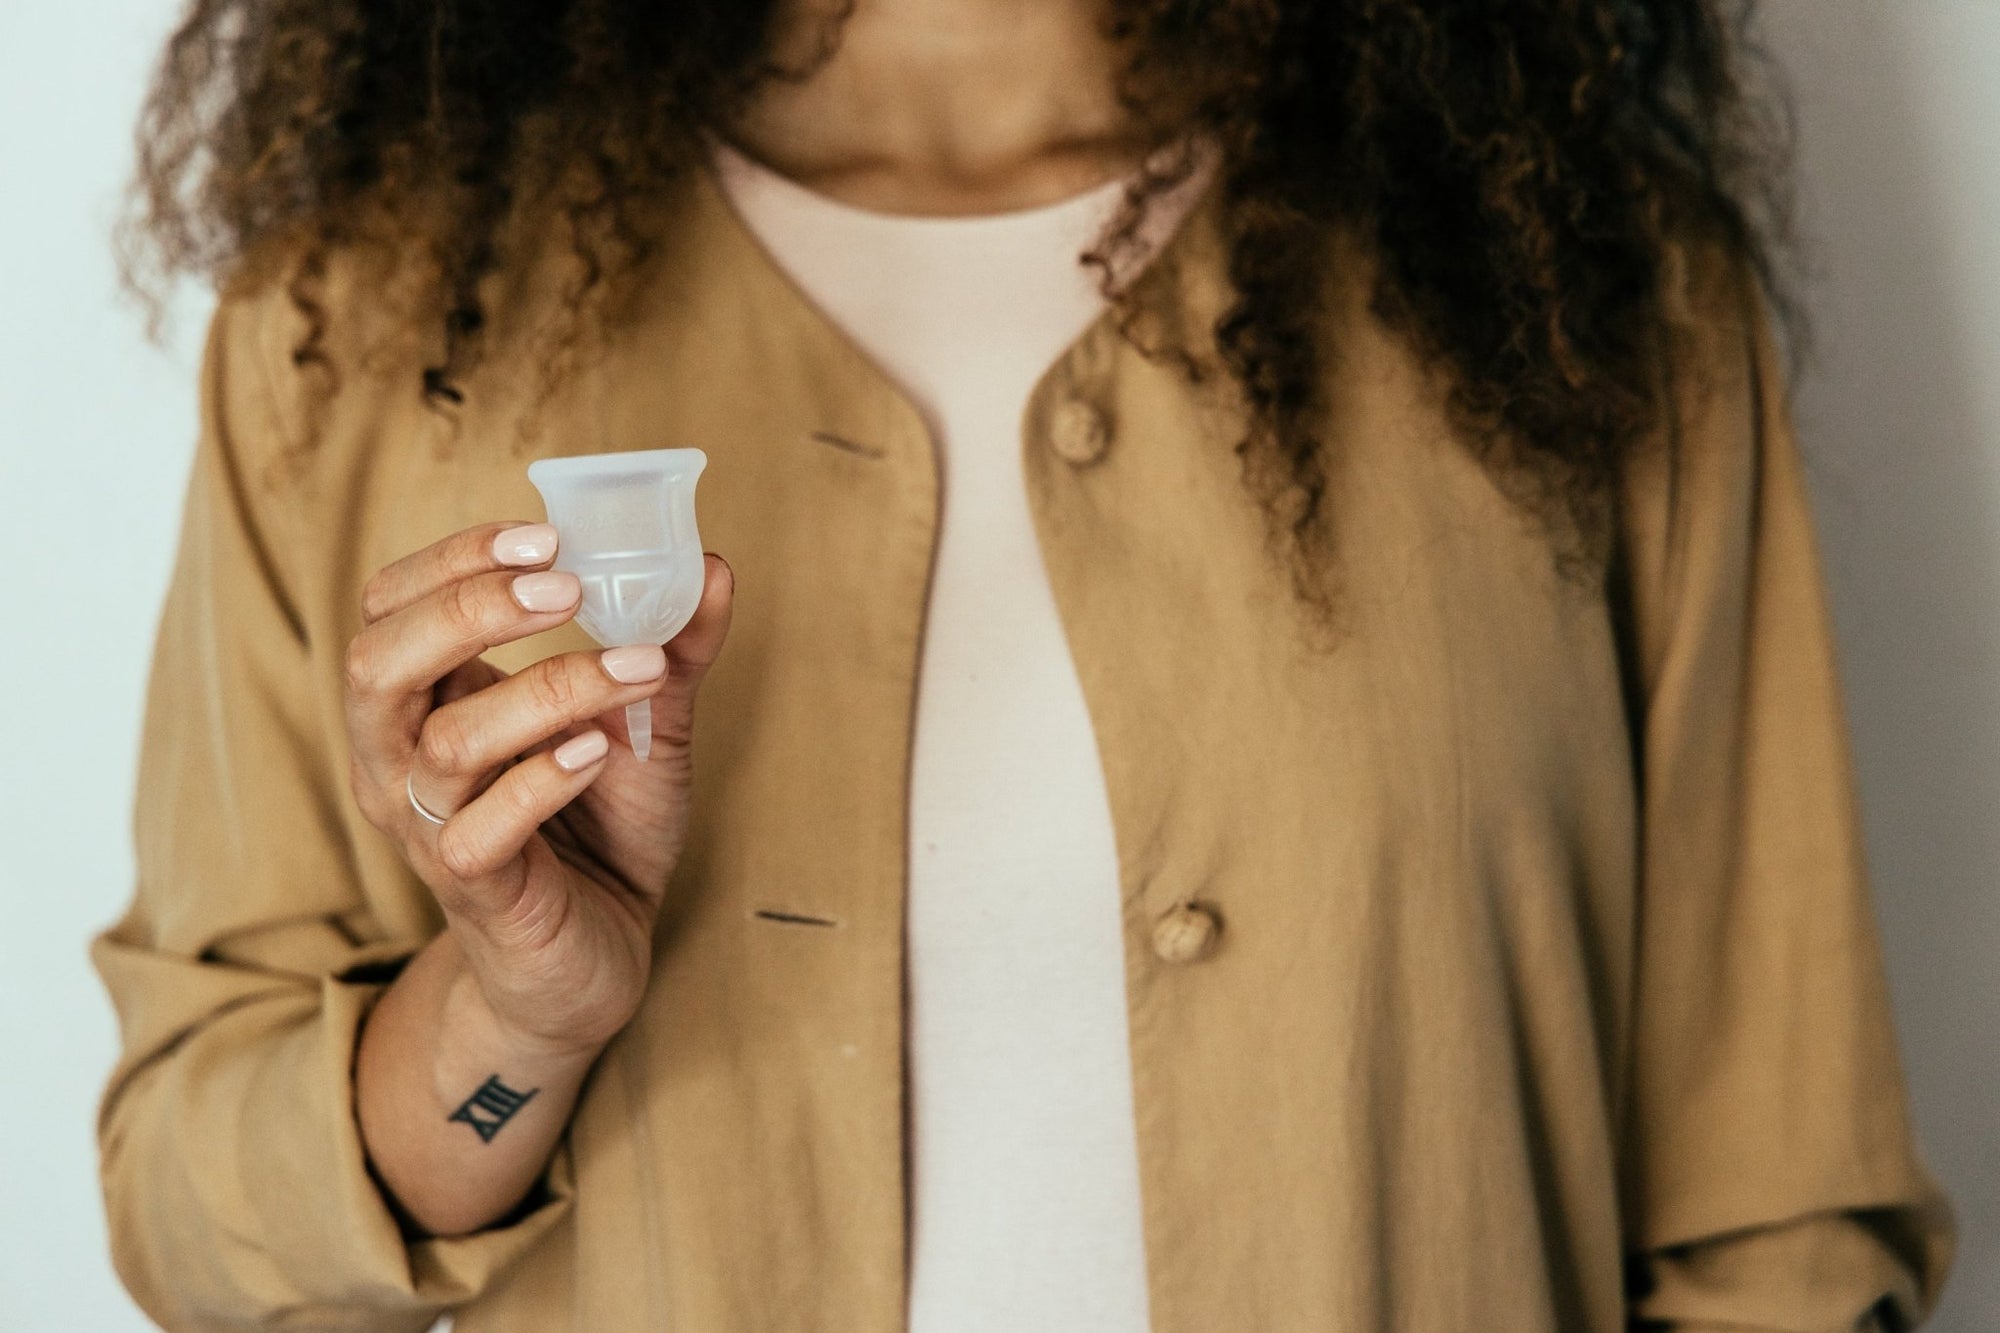 Menstrual cups: How to use, myths, and FAQs answered by a gynaecologist